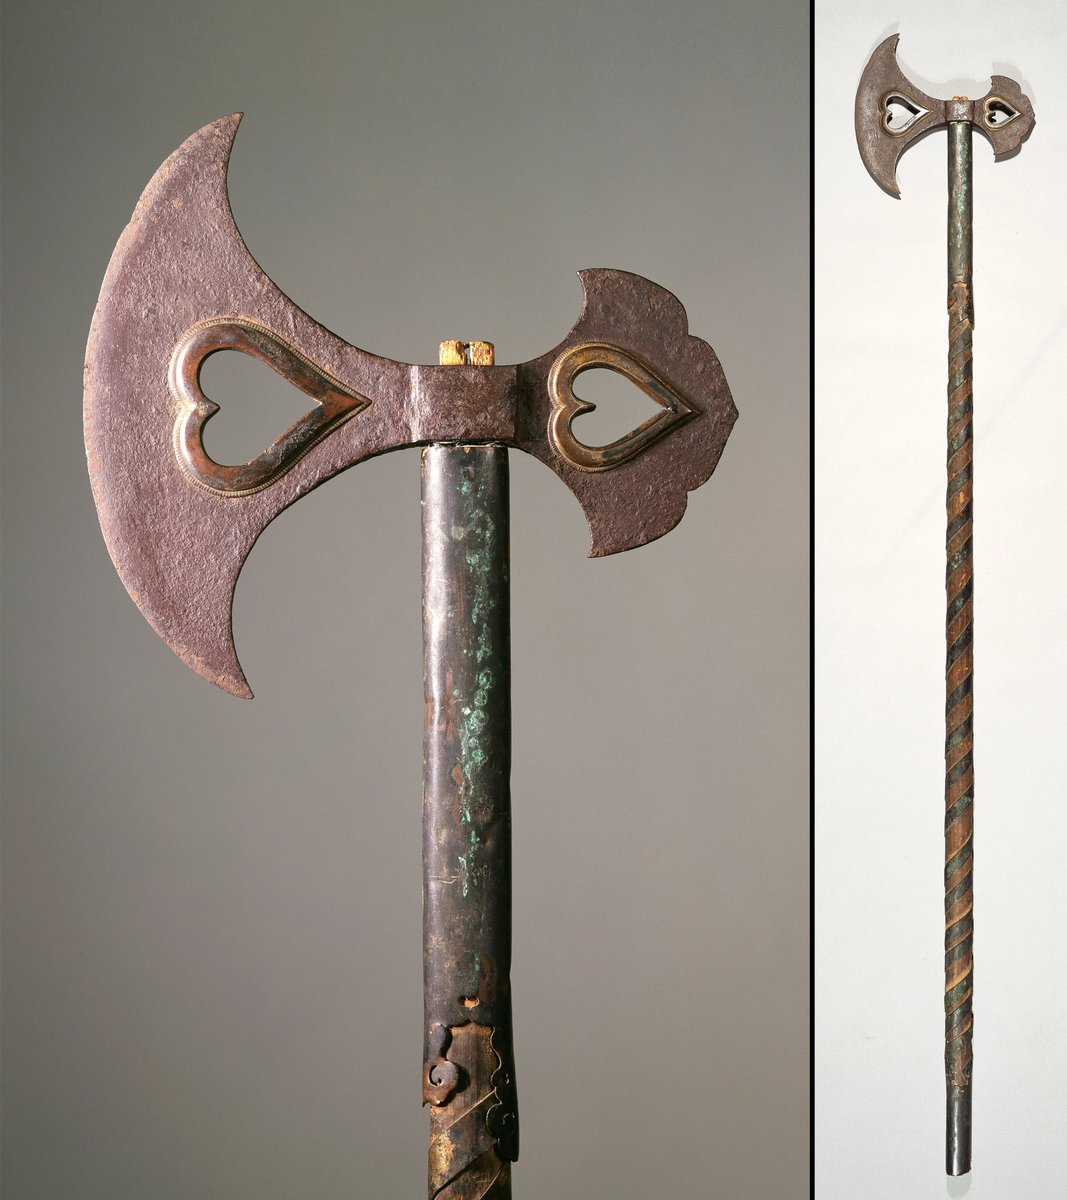 an axe with heart-shaped holes in the blade, japan, 14th century